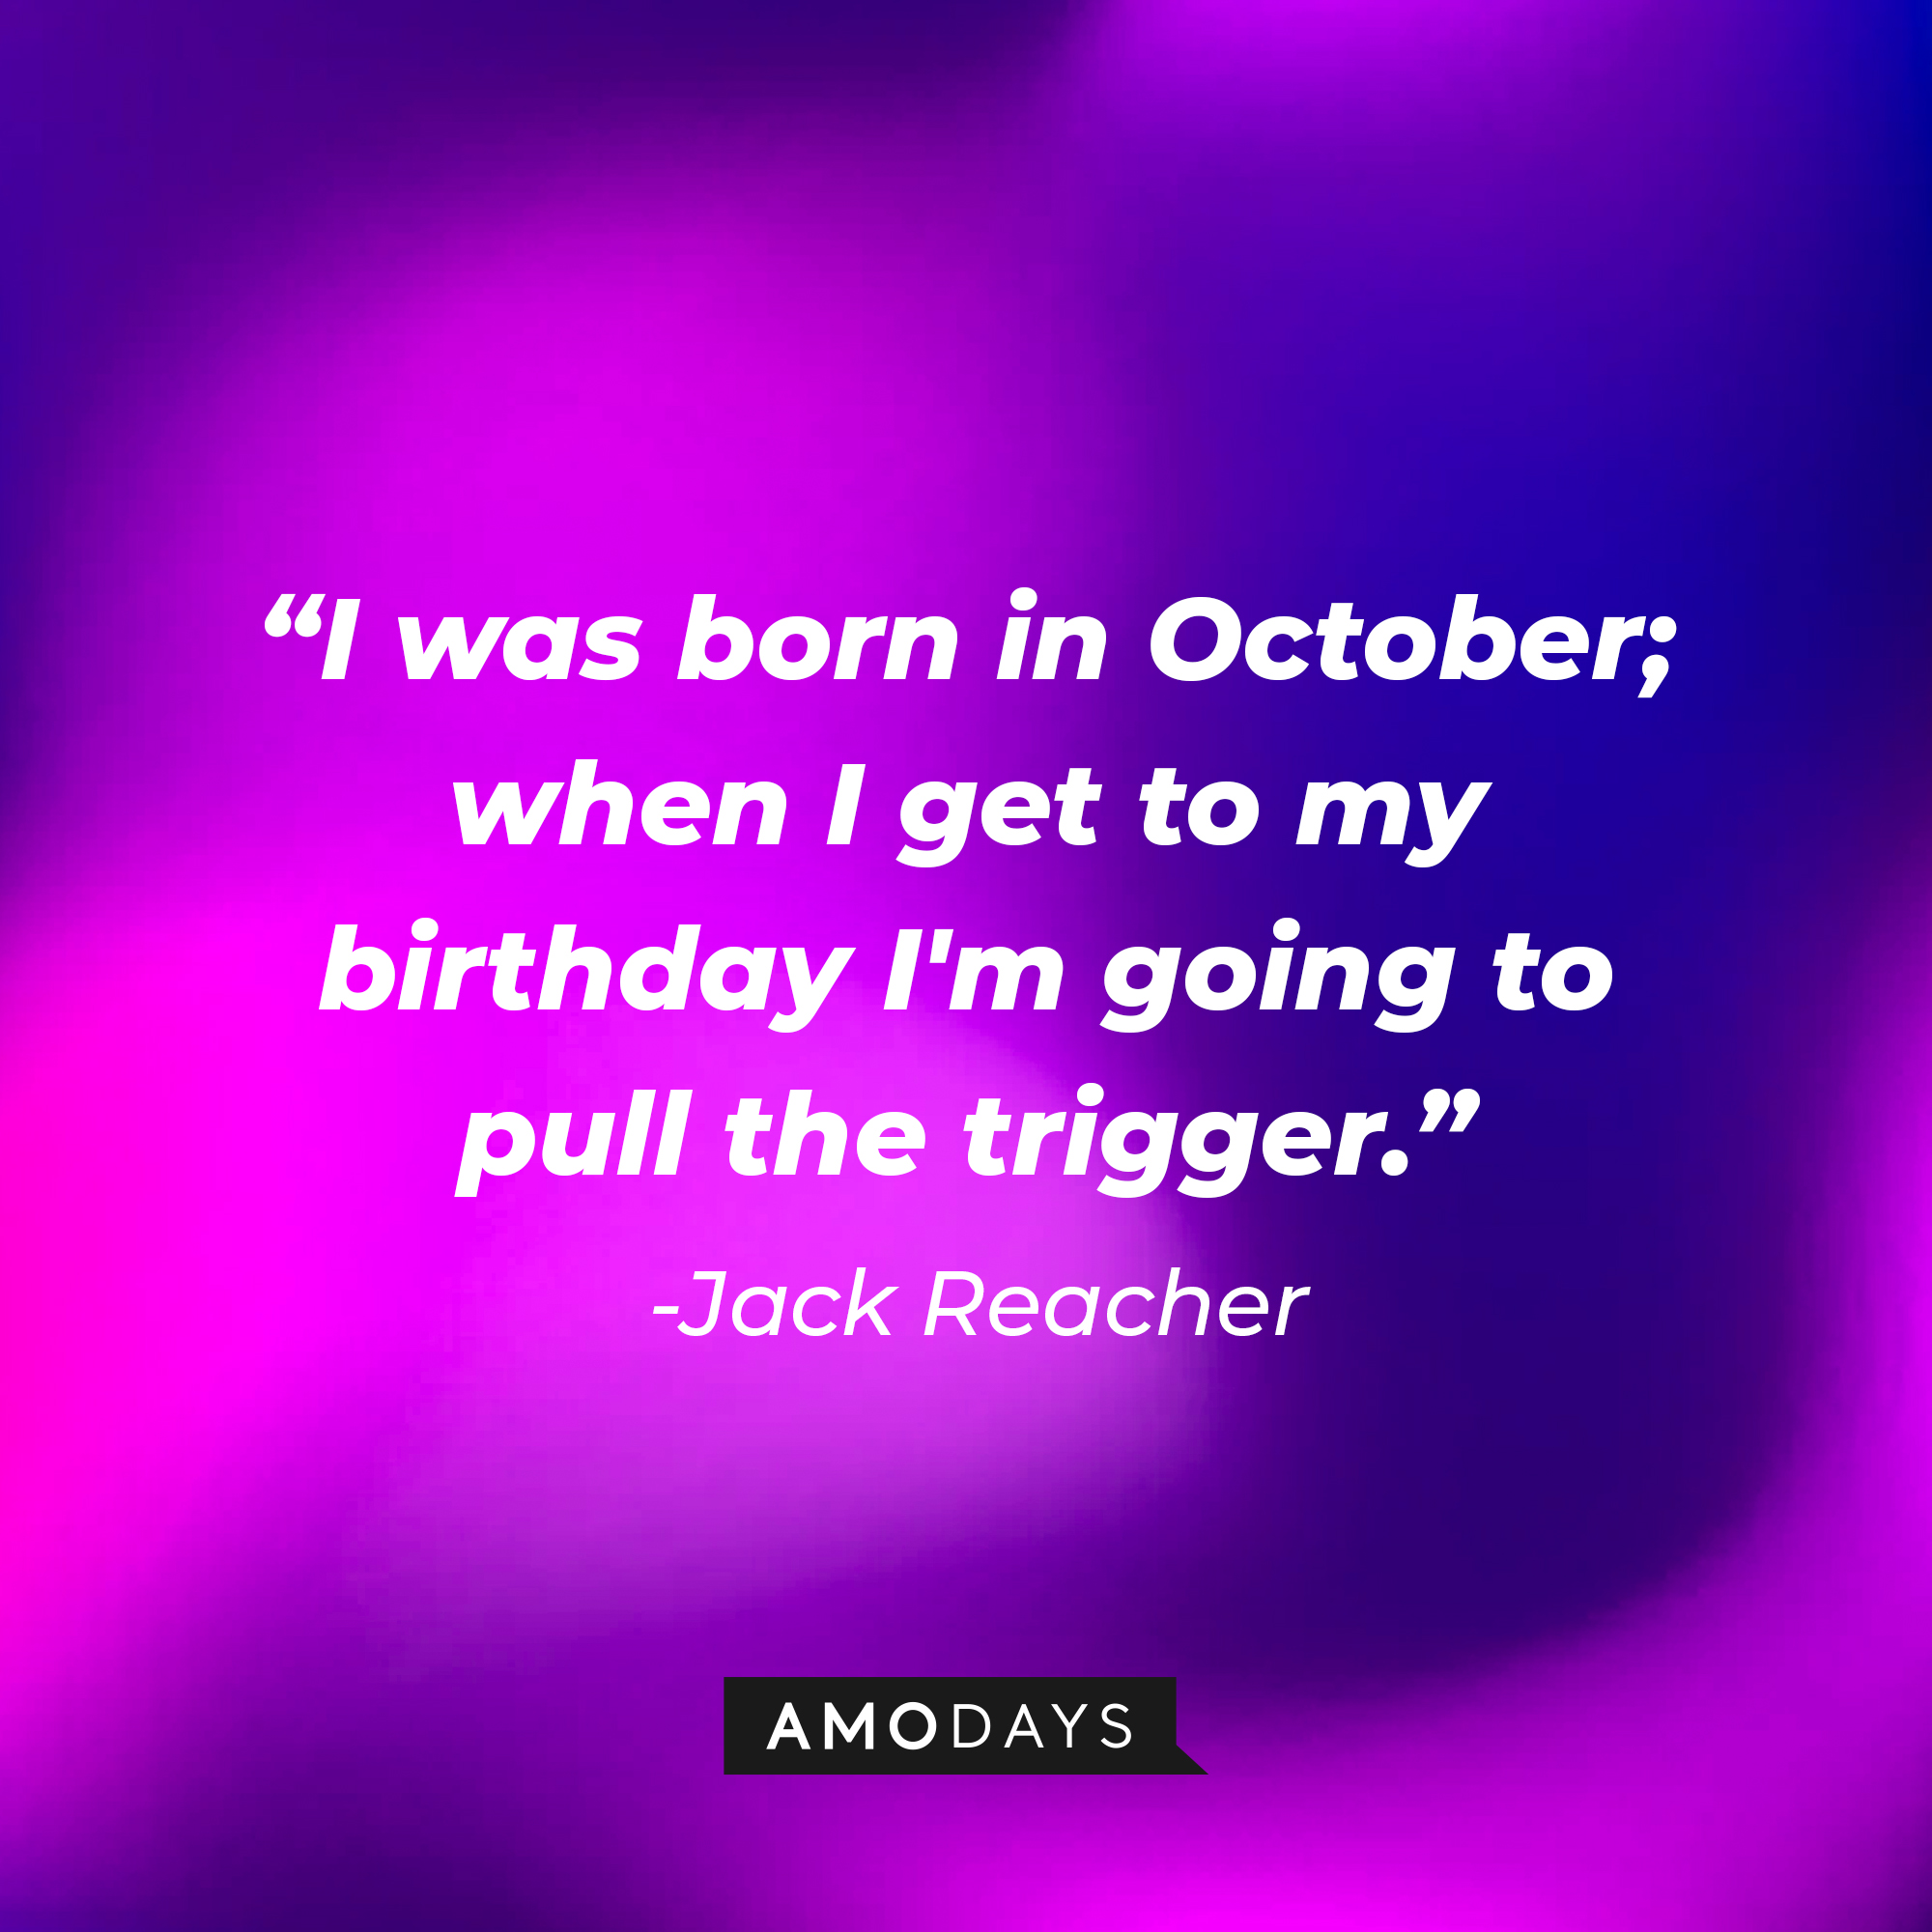 Jack Reacher's quote: "I was born in October; when I get to my birthday I'm going to pull the trigger" | Source: Amodays